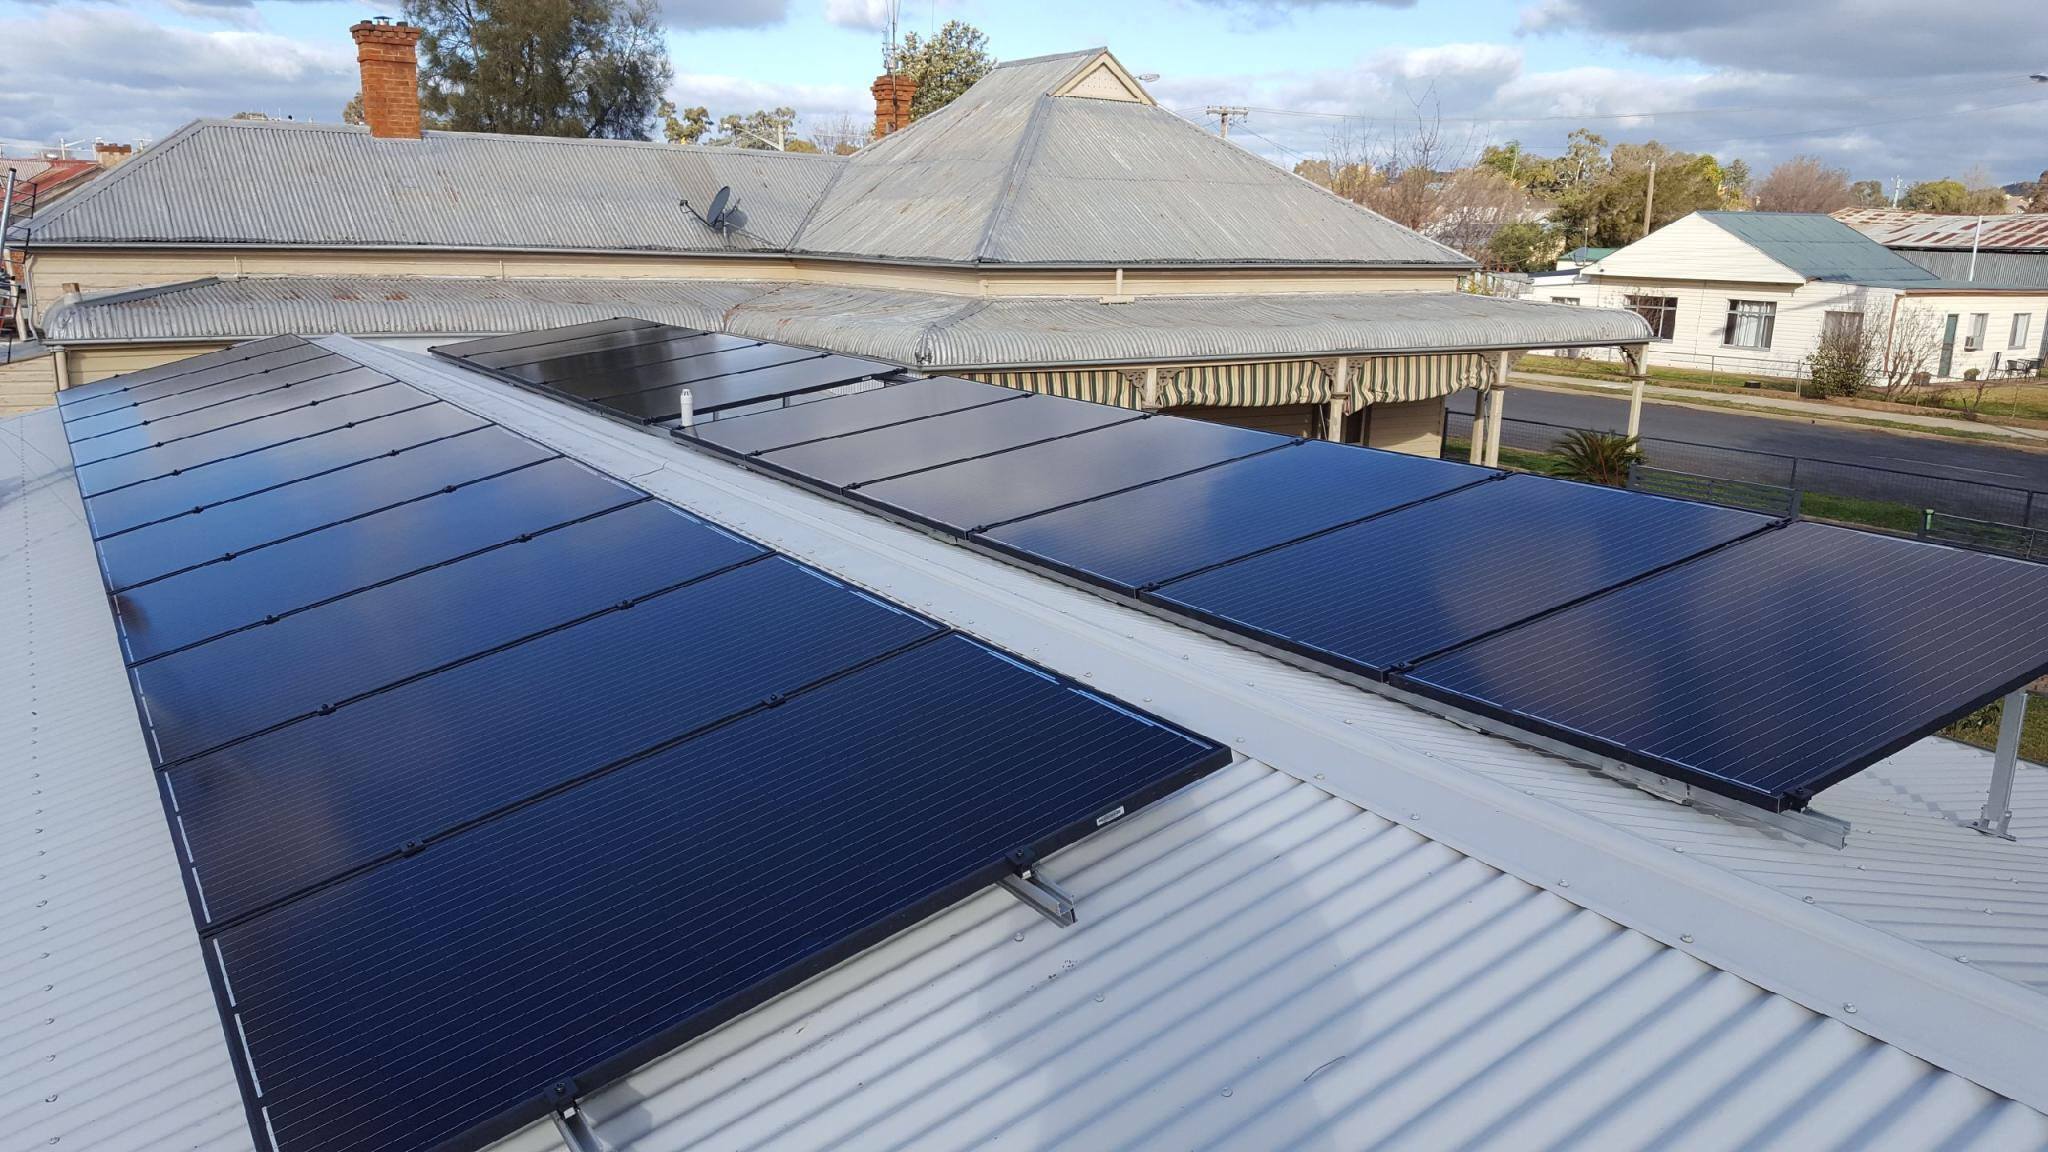 Solahart Silhouette solar panels installed on house roof in Orange, NSW - installation completed by Orange Electrical Works